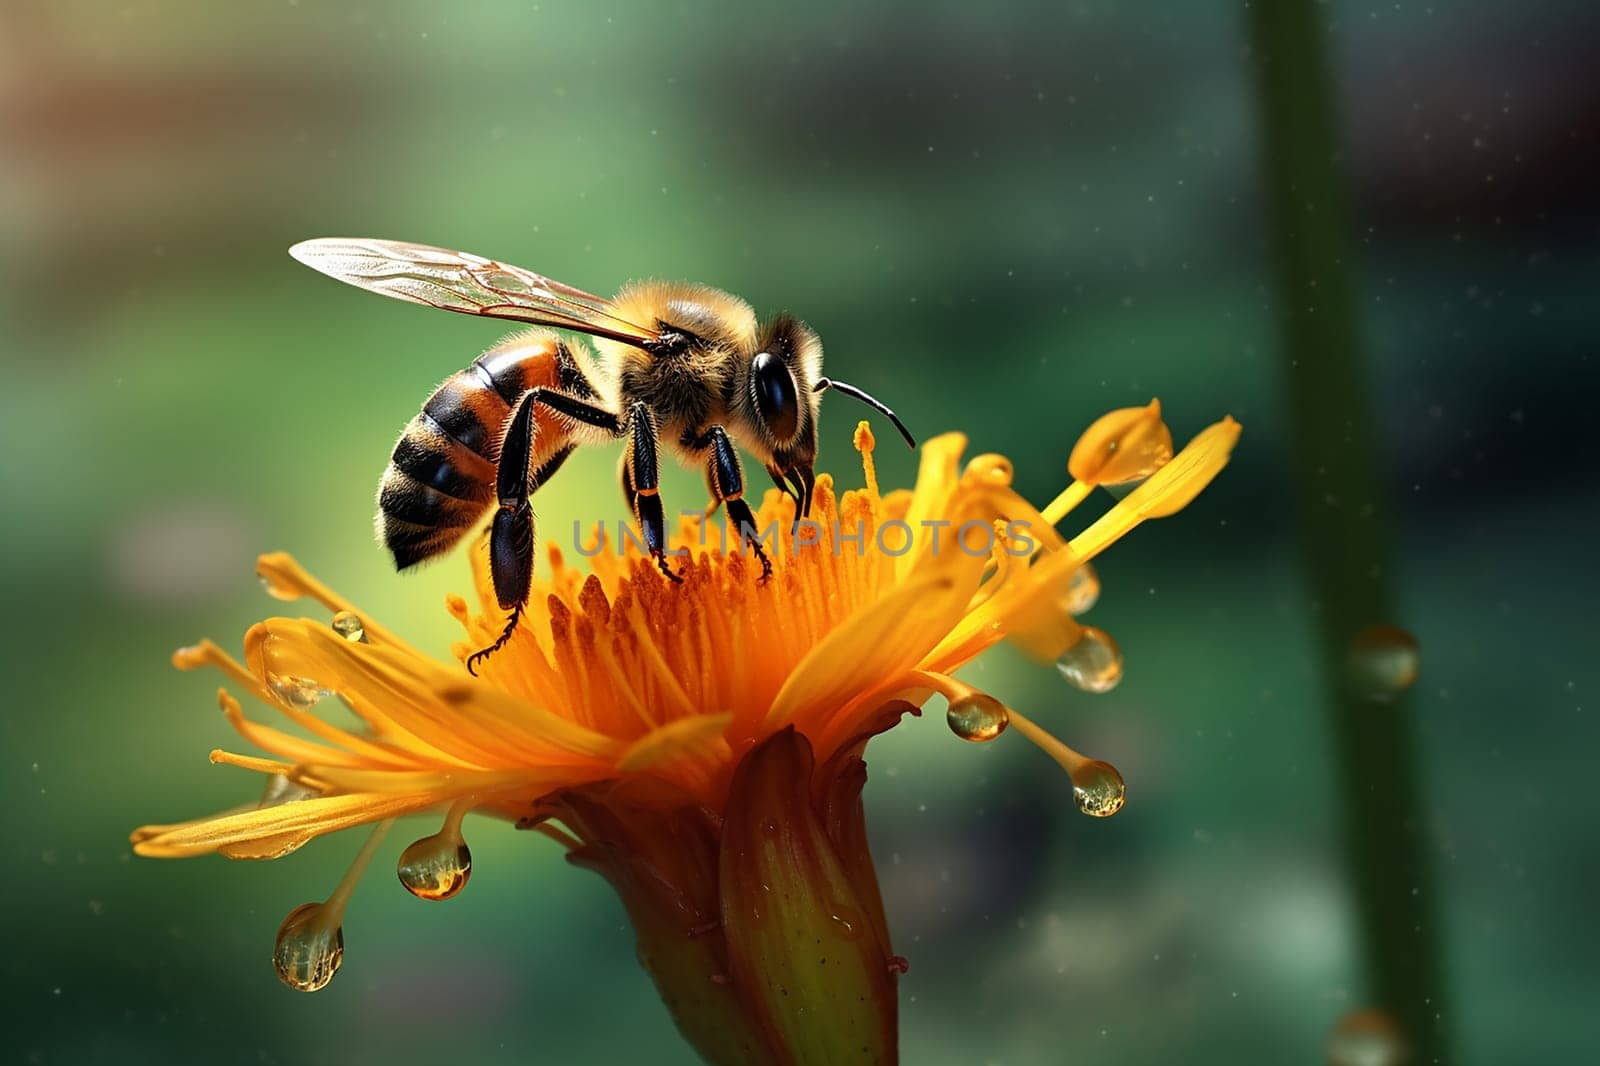 A bee in the process of pollinating a flower, with droplets of nectar and pollen visible on its body